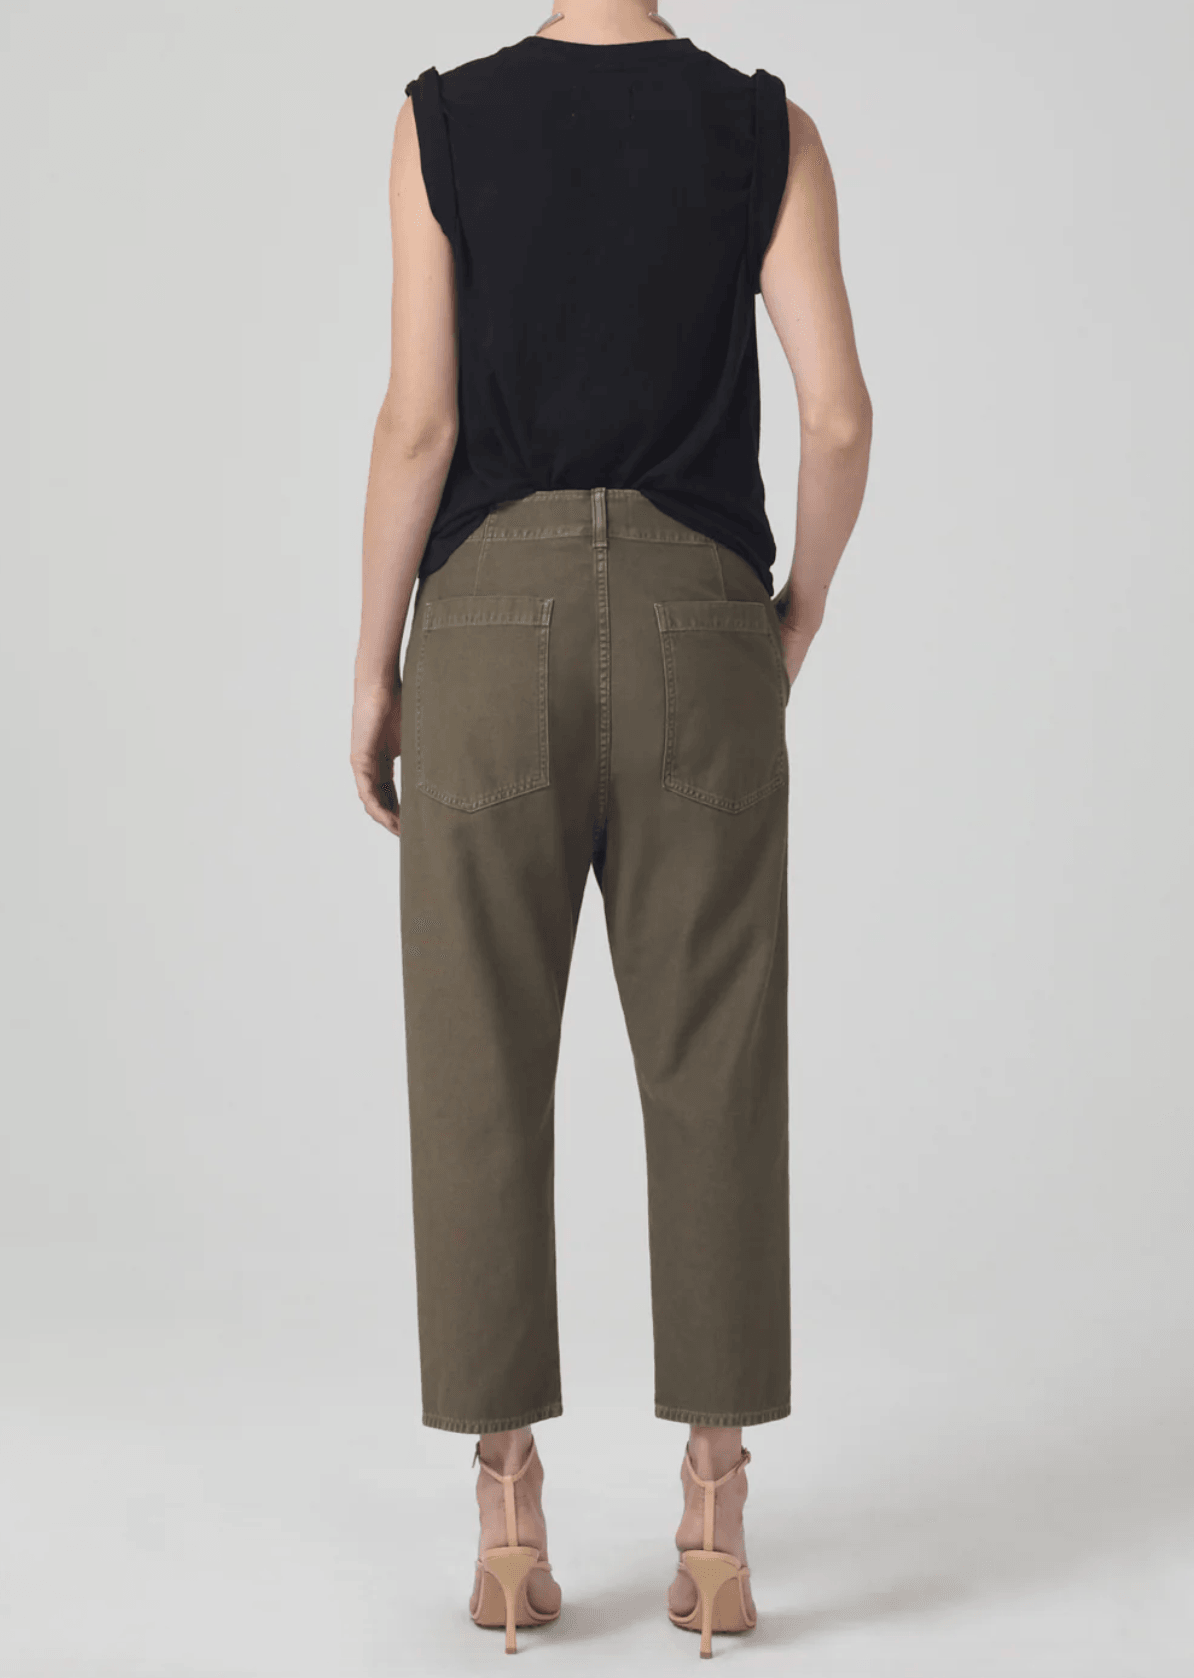 Citizens of Humanity - Pony Boy Khaki Utility Trousers - 32 The Guild 